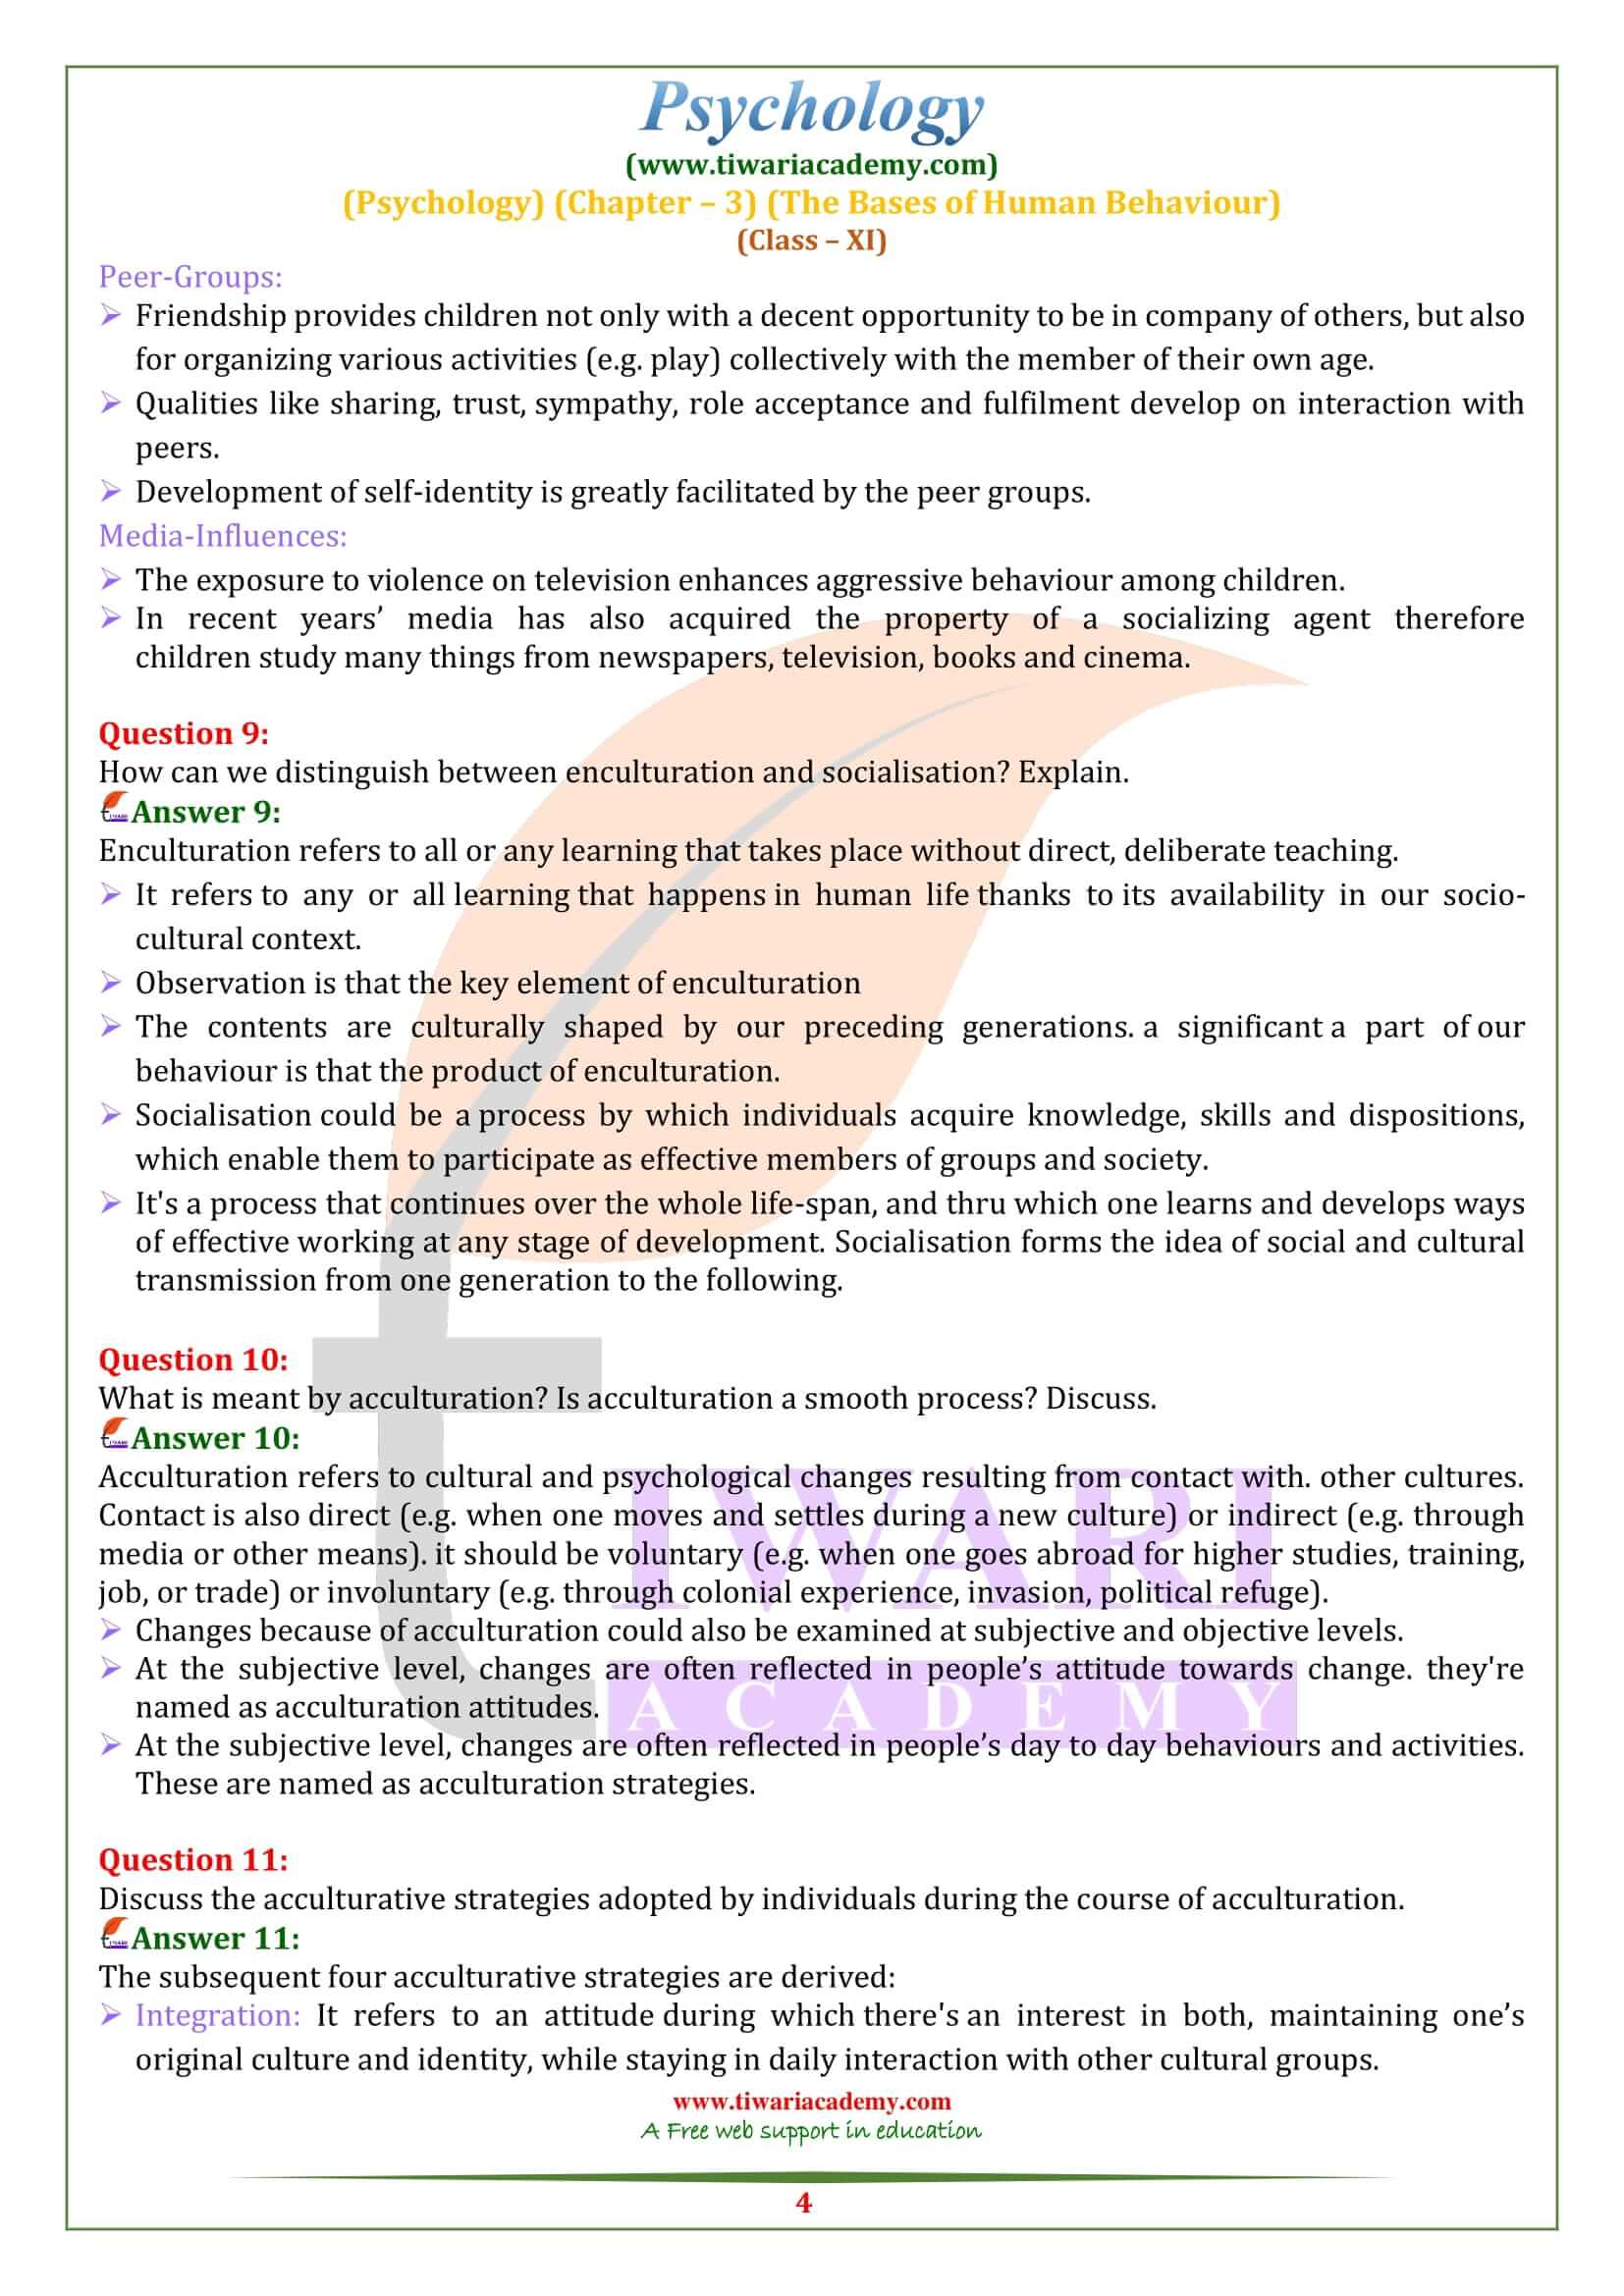 NCERT Solutions for Class 11 Psychology Chapter 3 Free guide